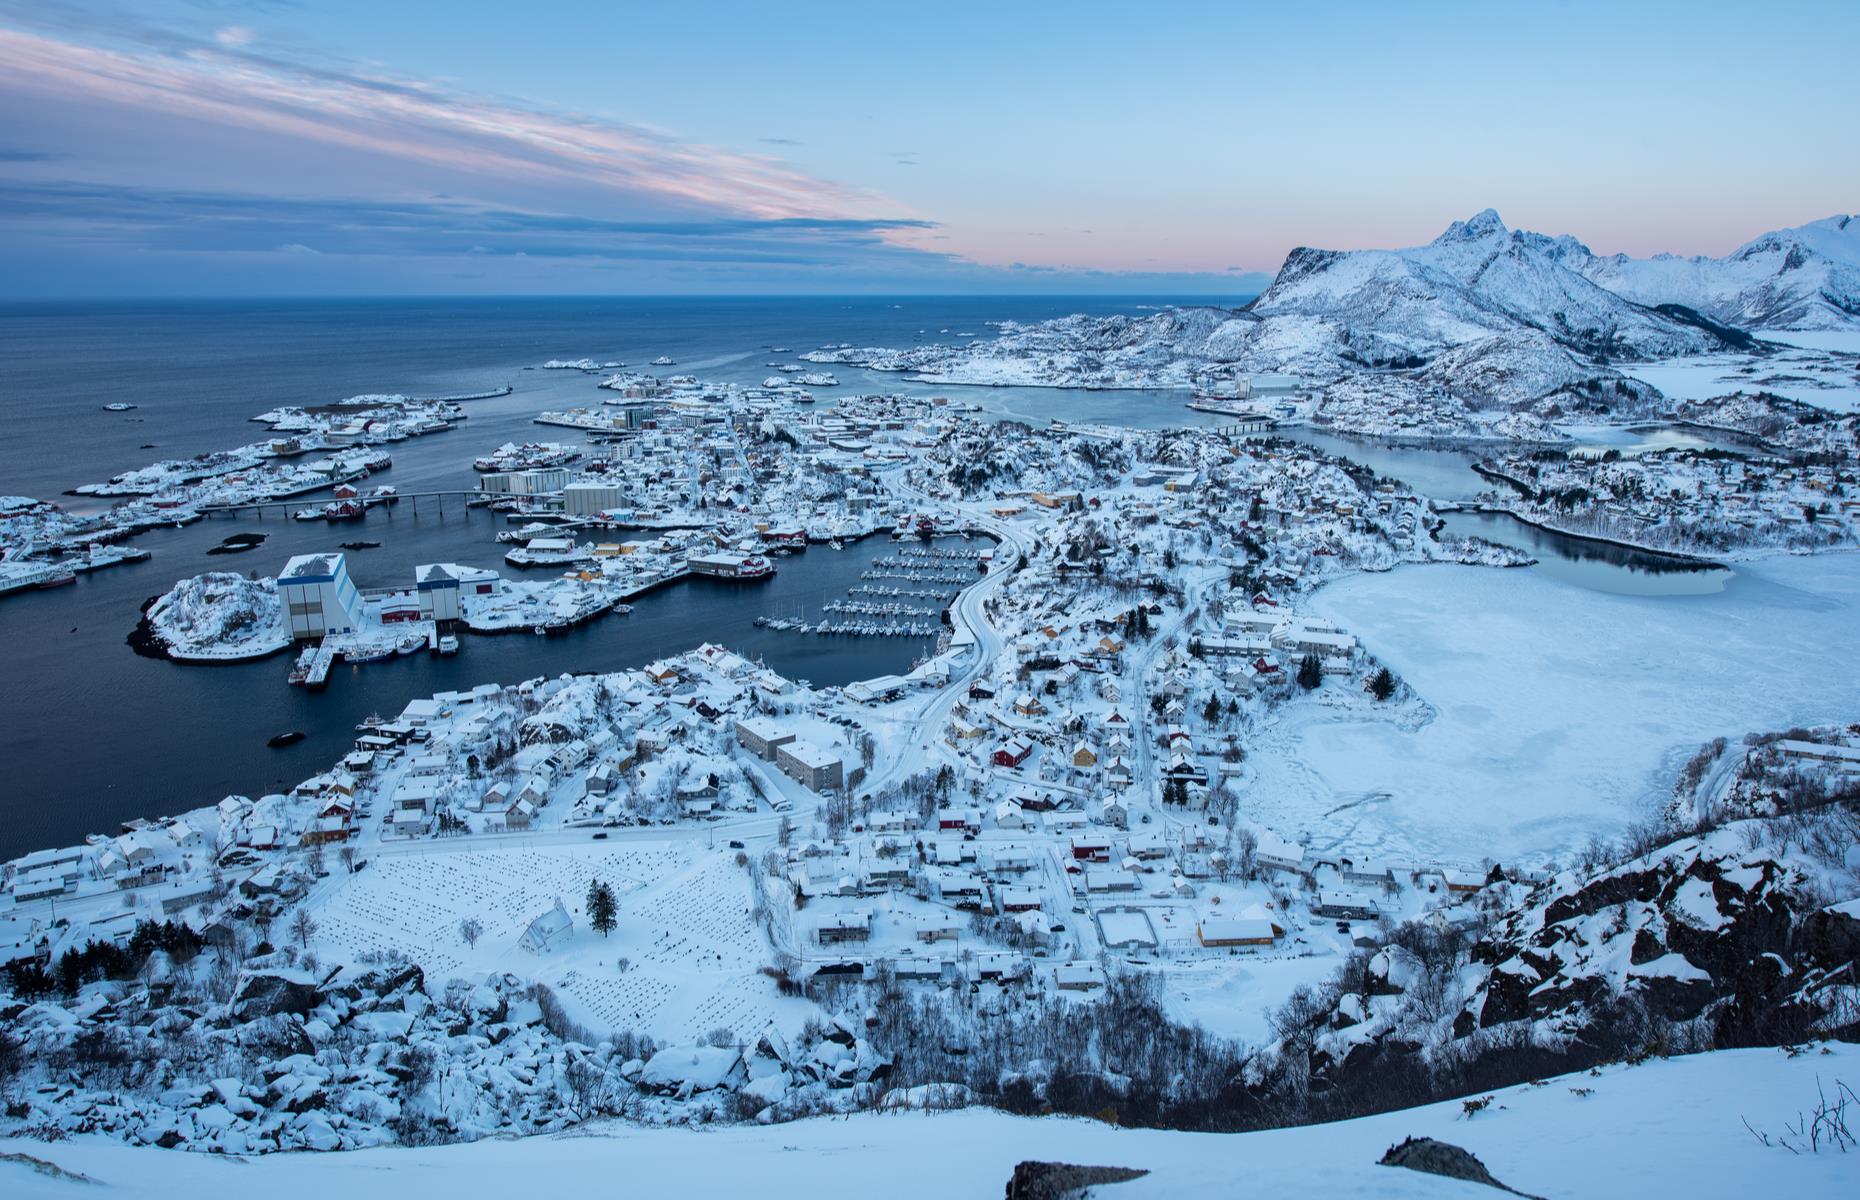 The tiny port town of Svolvær is located on the island of Austvågøya in the Lofoten archipelago, along the Vestfjorden. The isle offers plenty of dramatic landscapes, from mountains to lush green hills and white sandy beaches, making it a great destination for nature lovers. In this photo, the town is captured during winter with a blanket of snow.